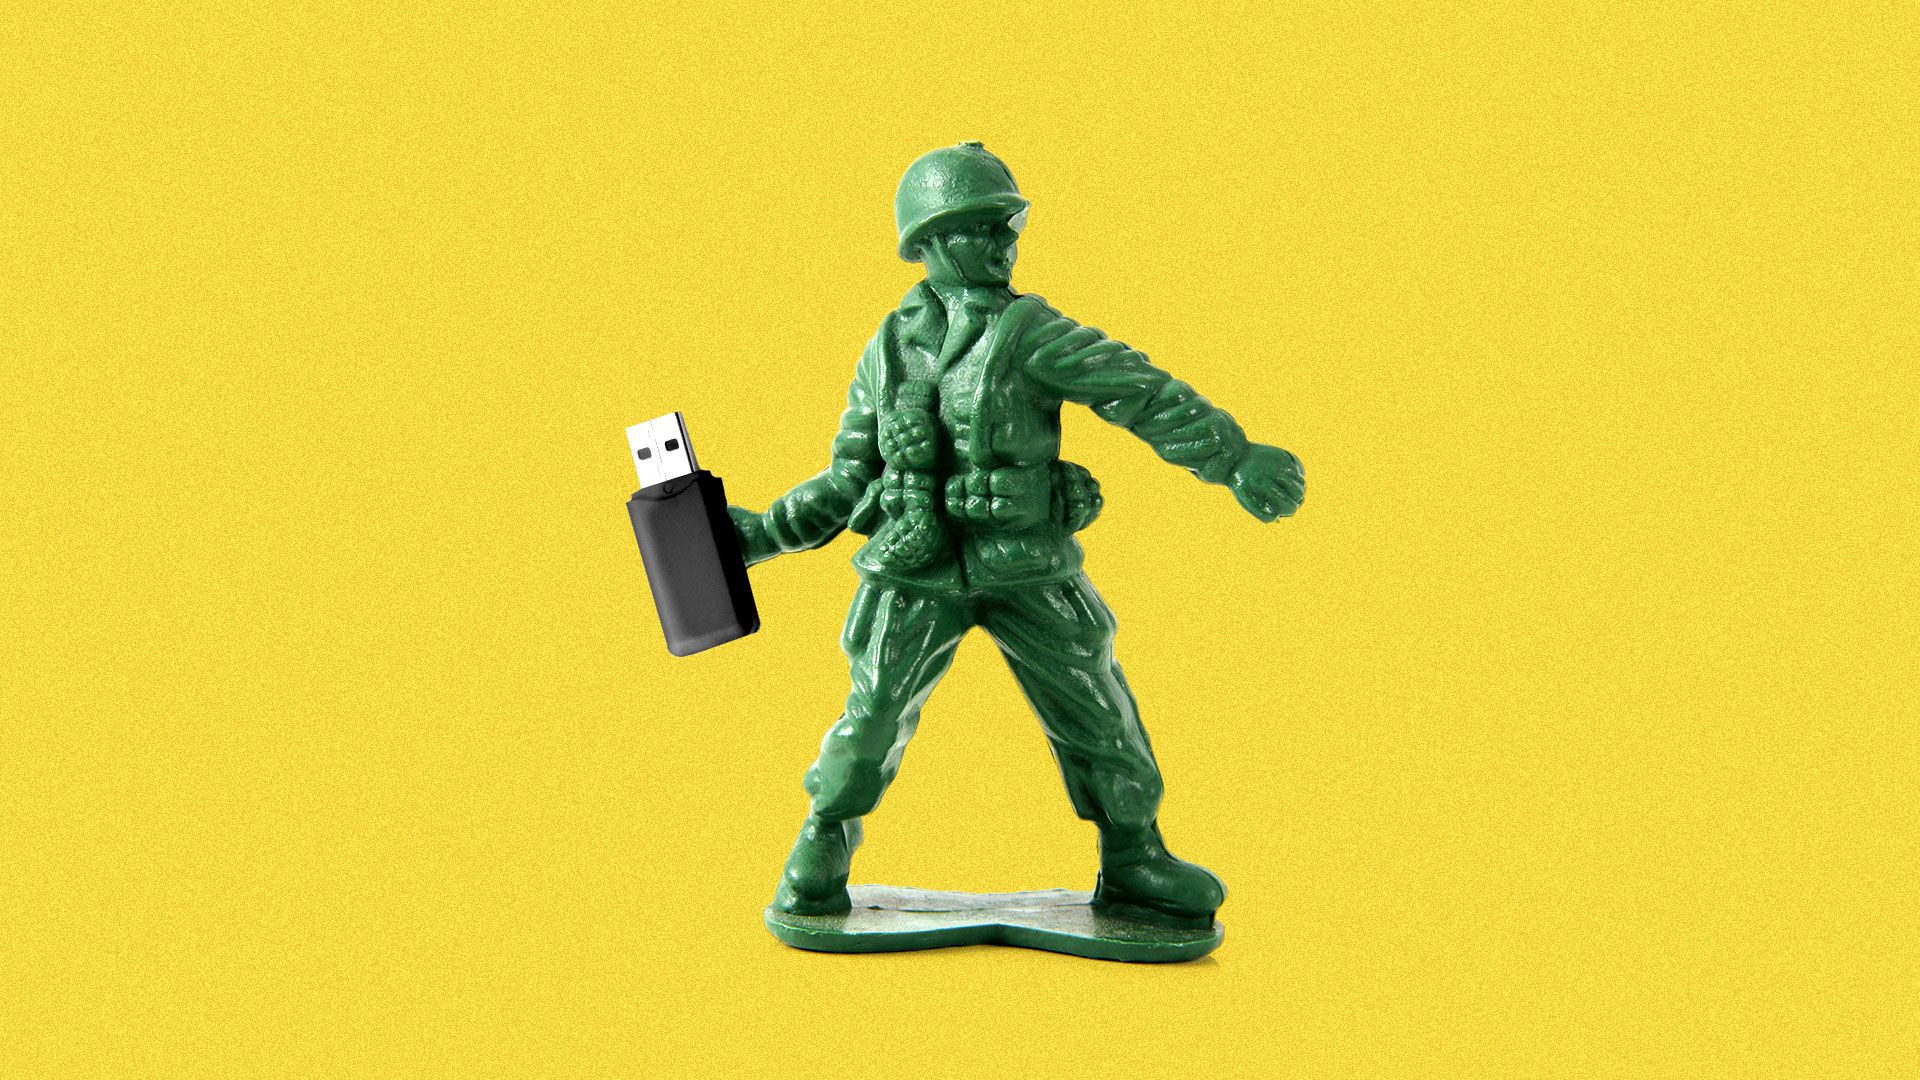 Illustration of a green army man about to throw a USB stick as if it's a grenade